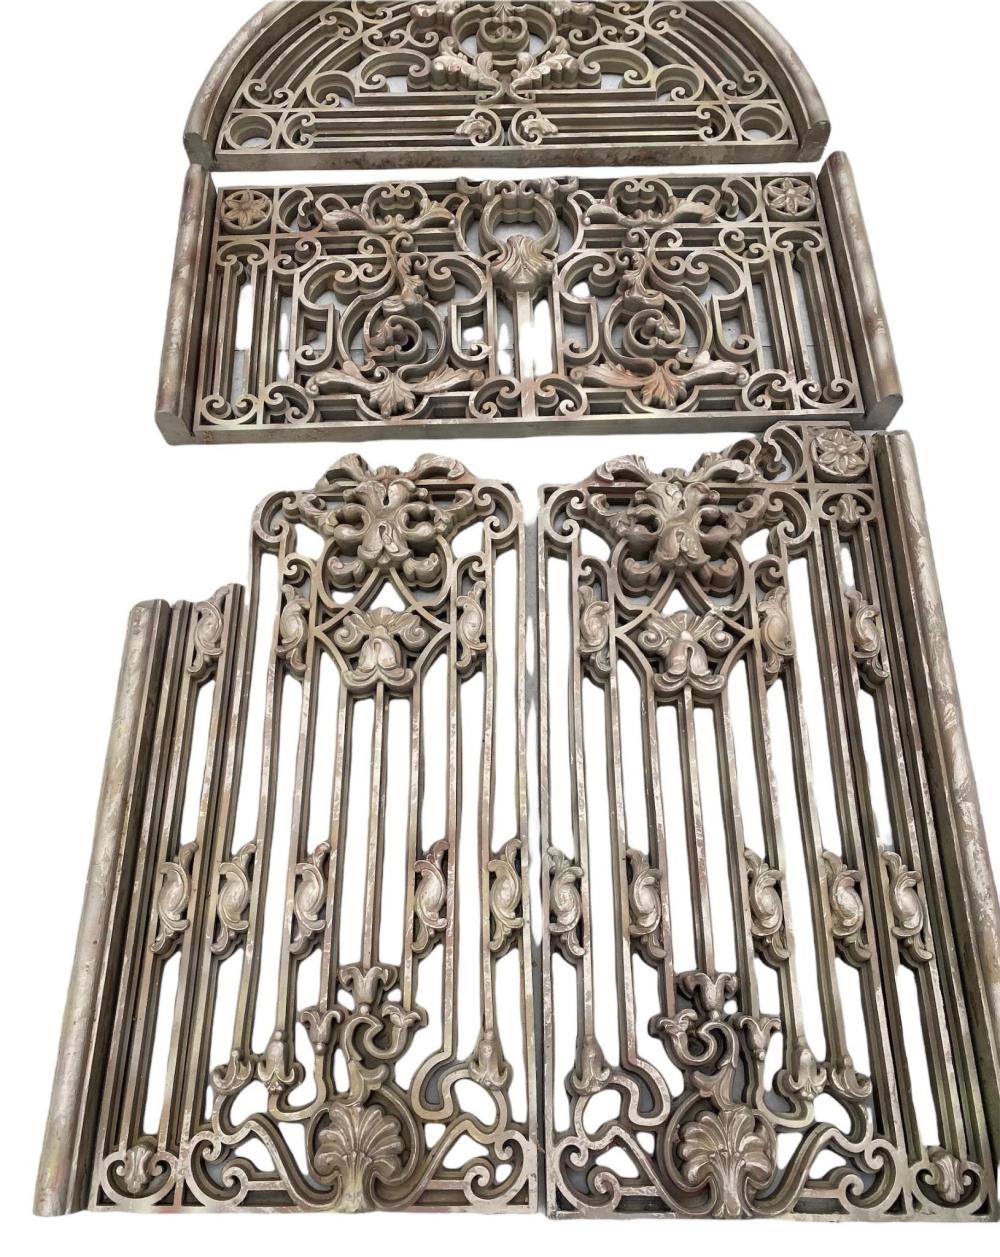 FIVE-PIECE GOTHIC STYLE SILVERED